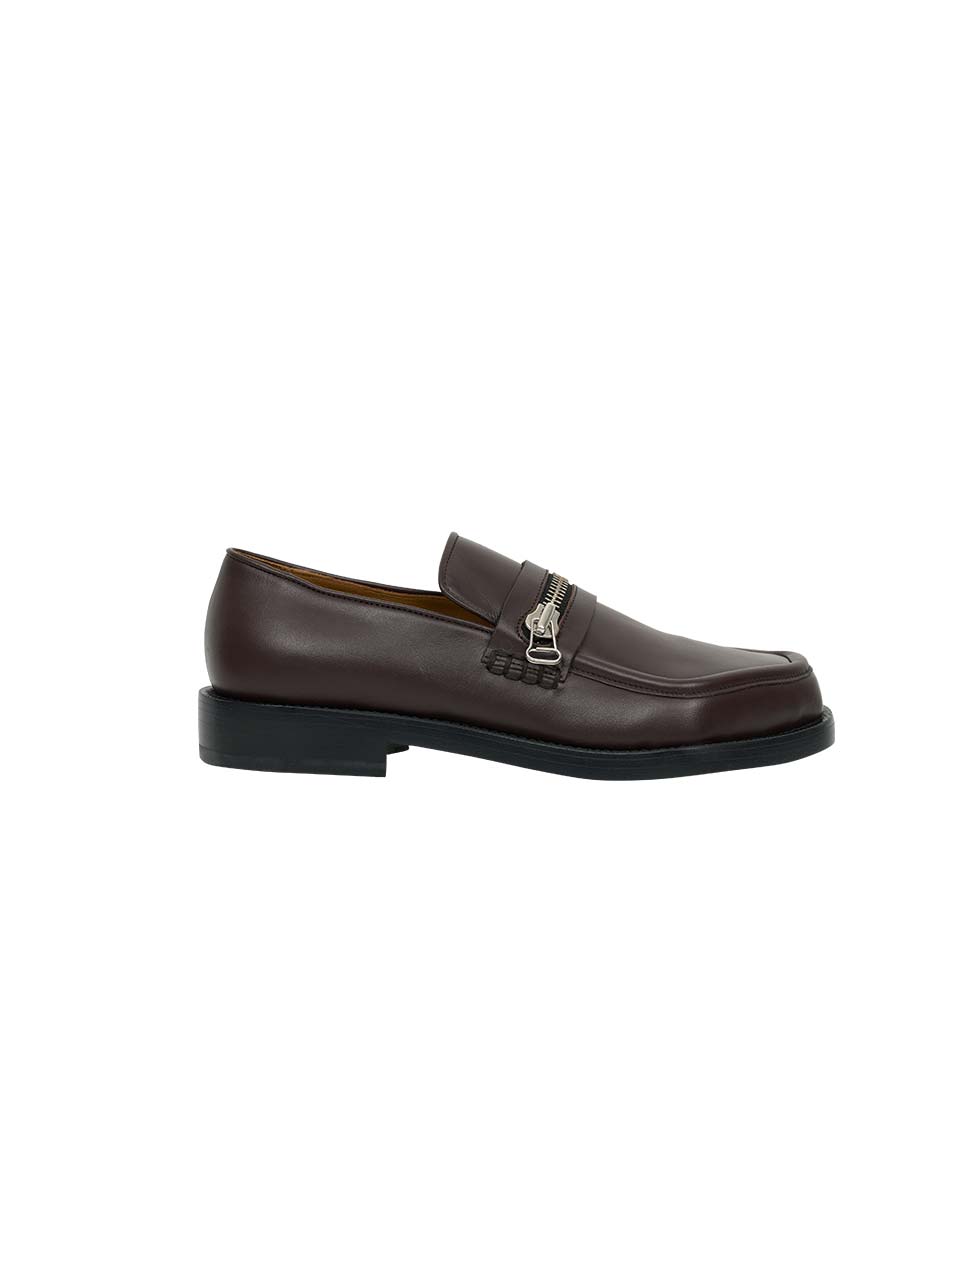 MAGLIANO - ZIPPED MONSTER LOAFER (BROWN)